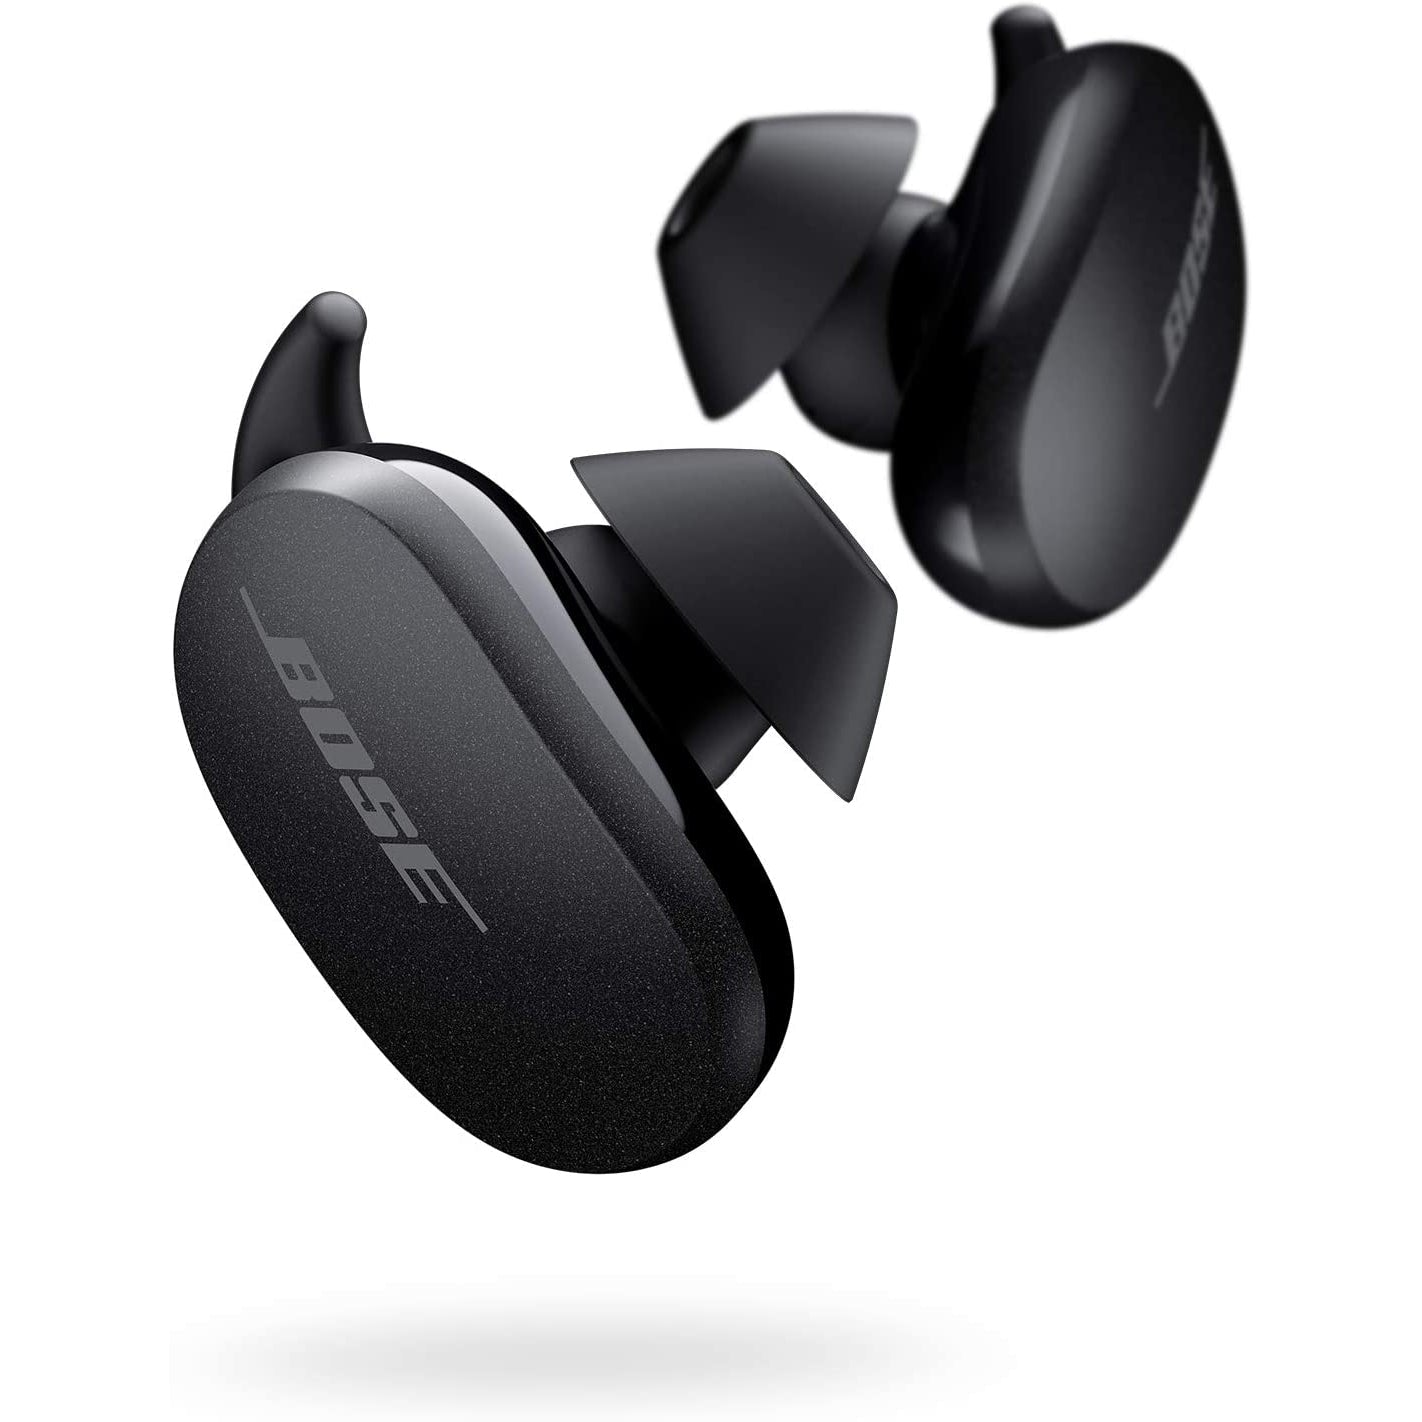 Bose QuietComfort Wireless Bluetooth Noise-Cancelling Earbuds - Triple Black - Refurbished Good